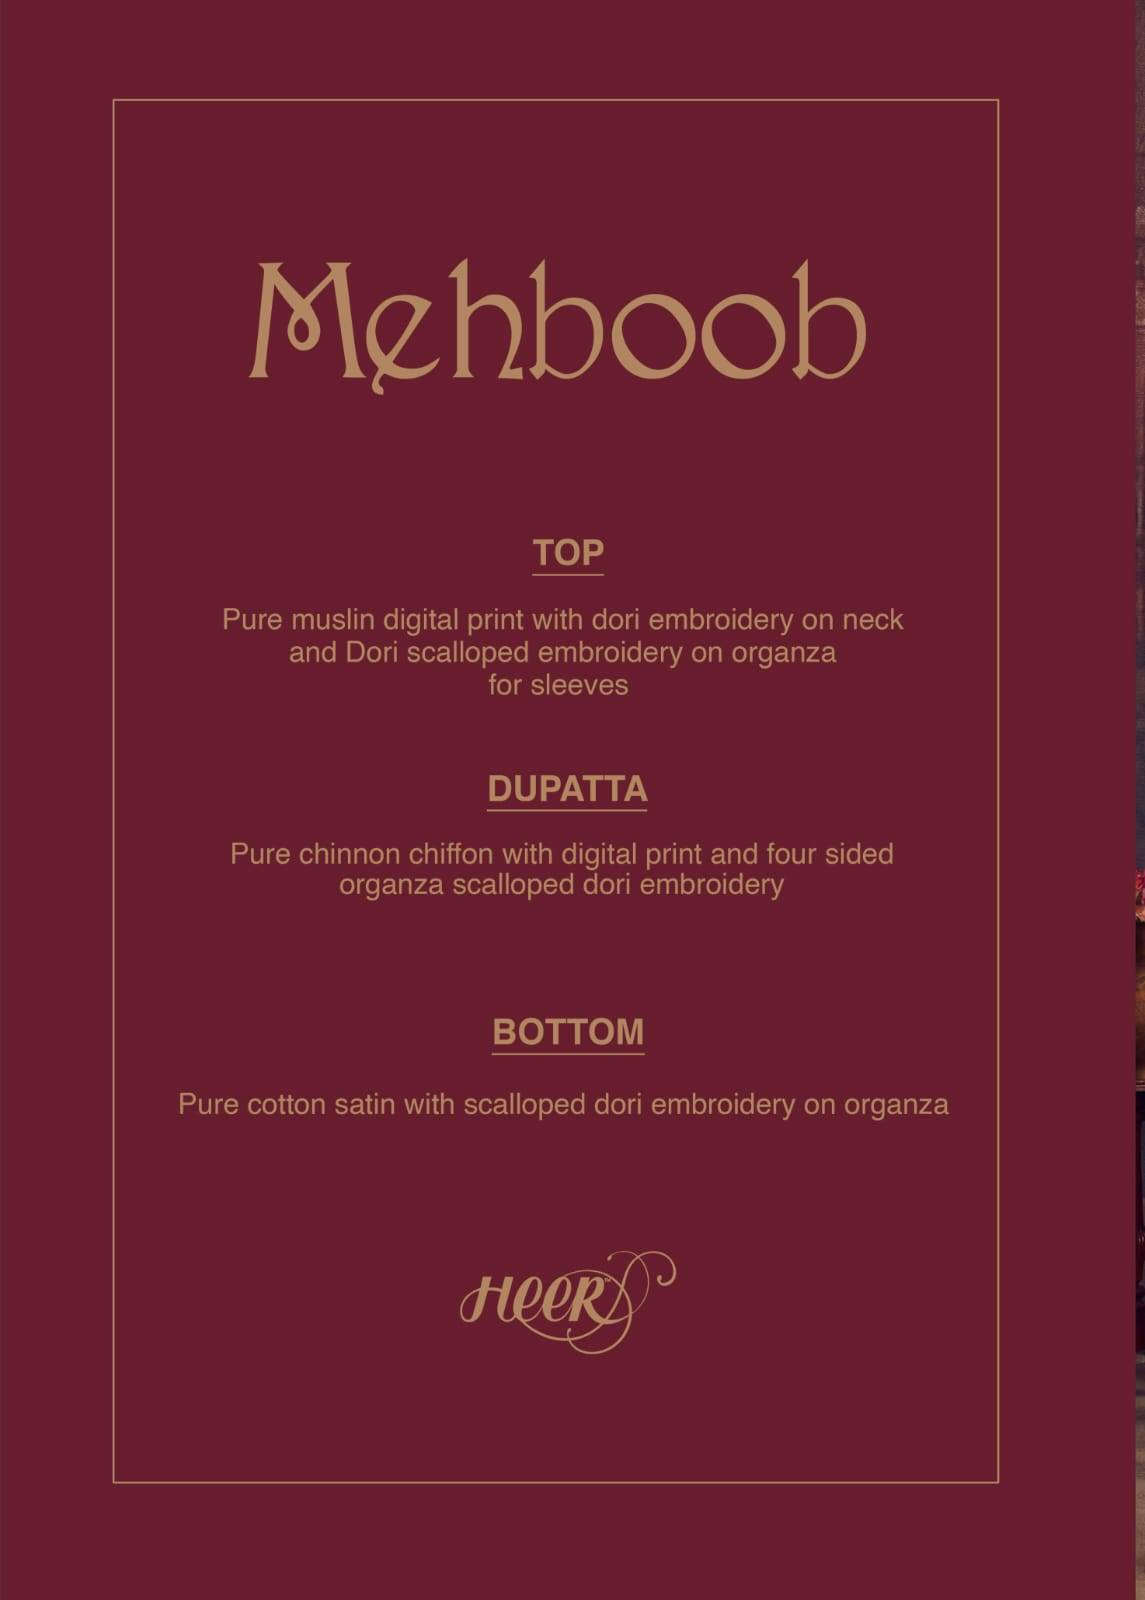 Mehboob By Kimora Fashion 9031 To 9038 Series Beautiful Stylish Festive Suits Fancy Colorful Casual Wear & Ethnic Wear & Ready To Wear Pure Muslin Print With Embroidery Dresses At Wholesale Price